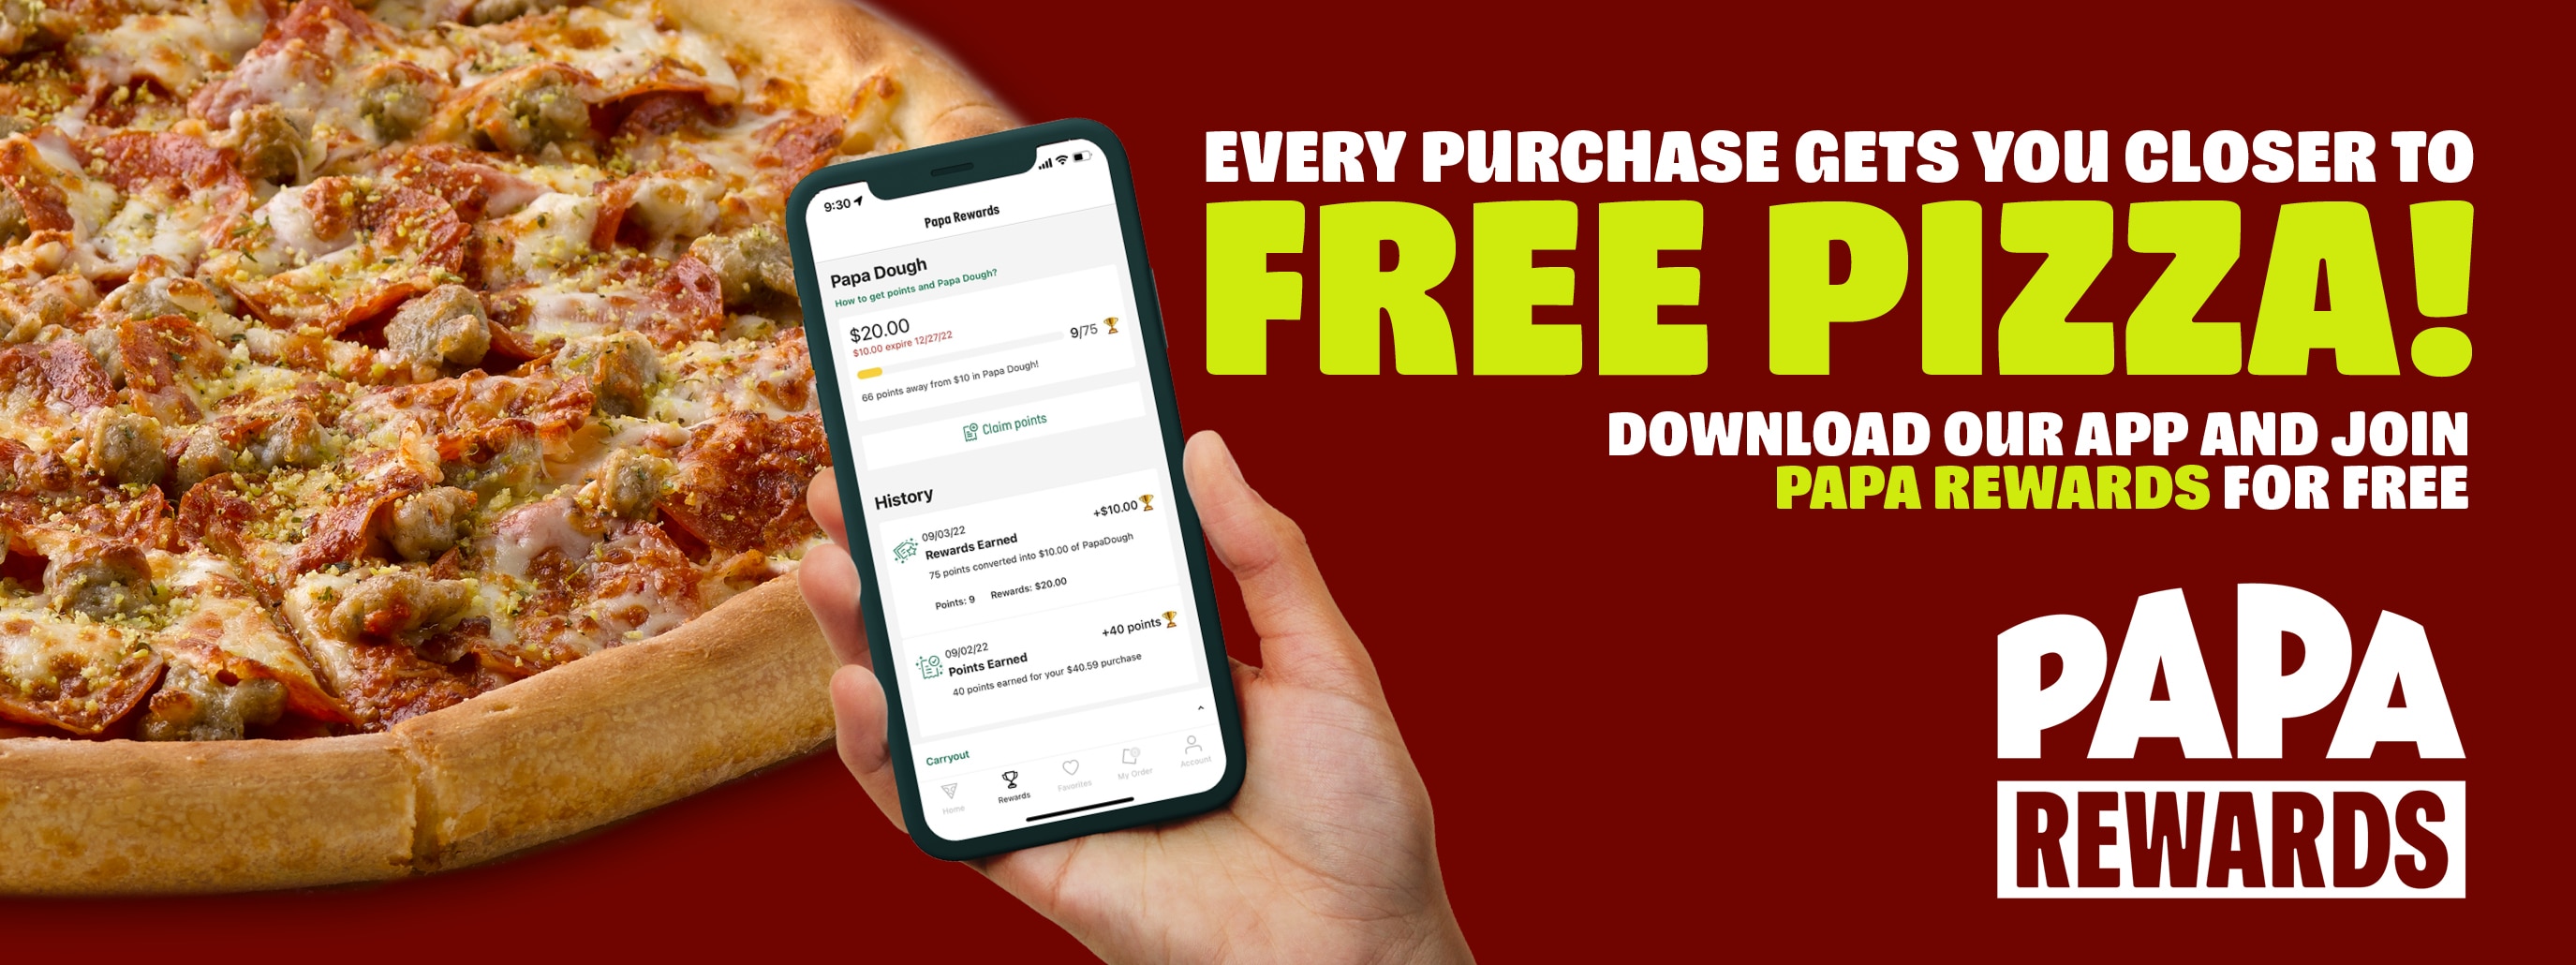 DOWNLOAD OUR APP AND JOIN PAPA REWARDS FOR FREE